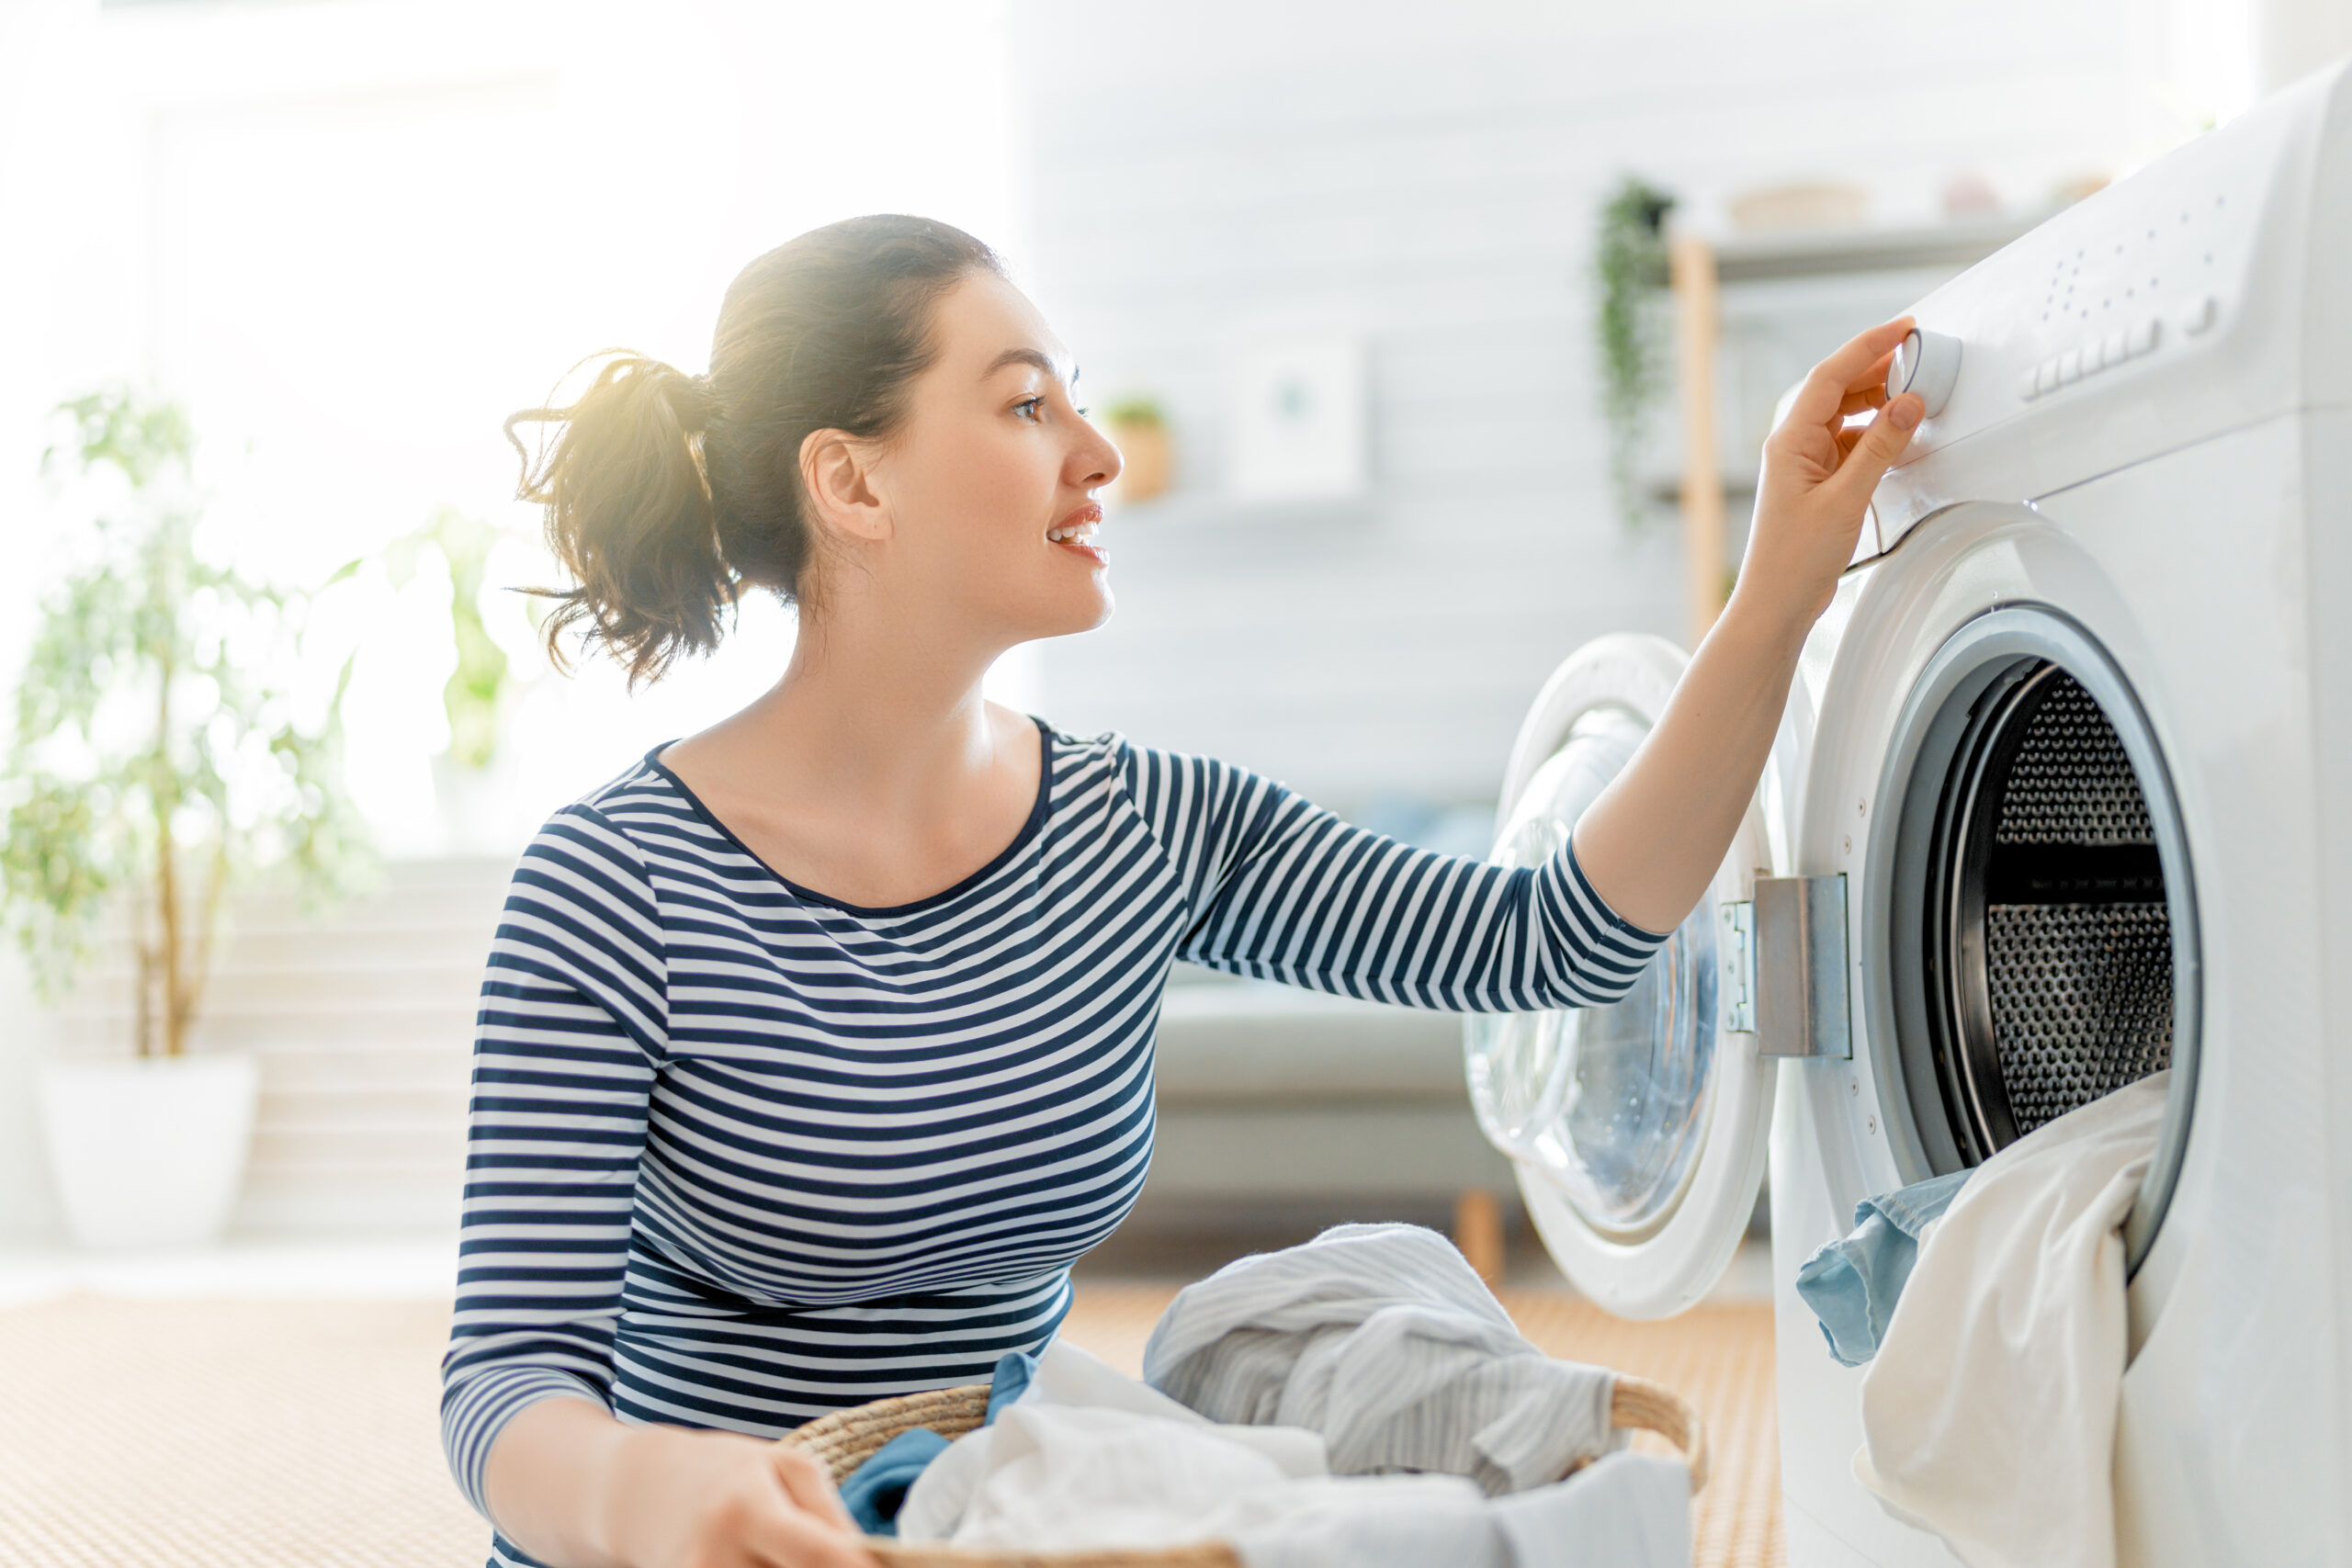 Woman staying motivated while doing laundry